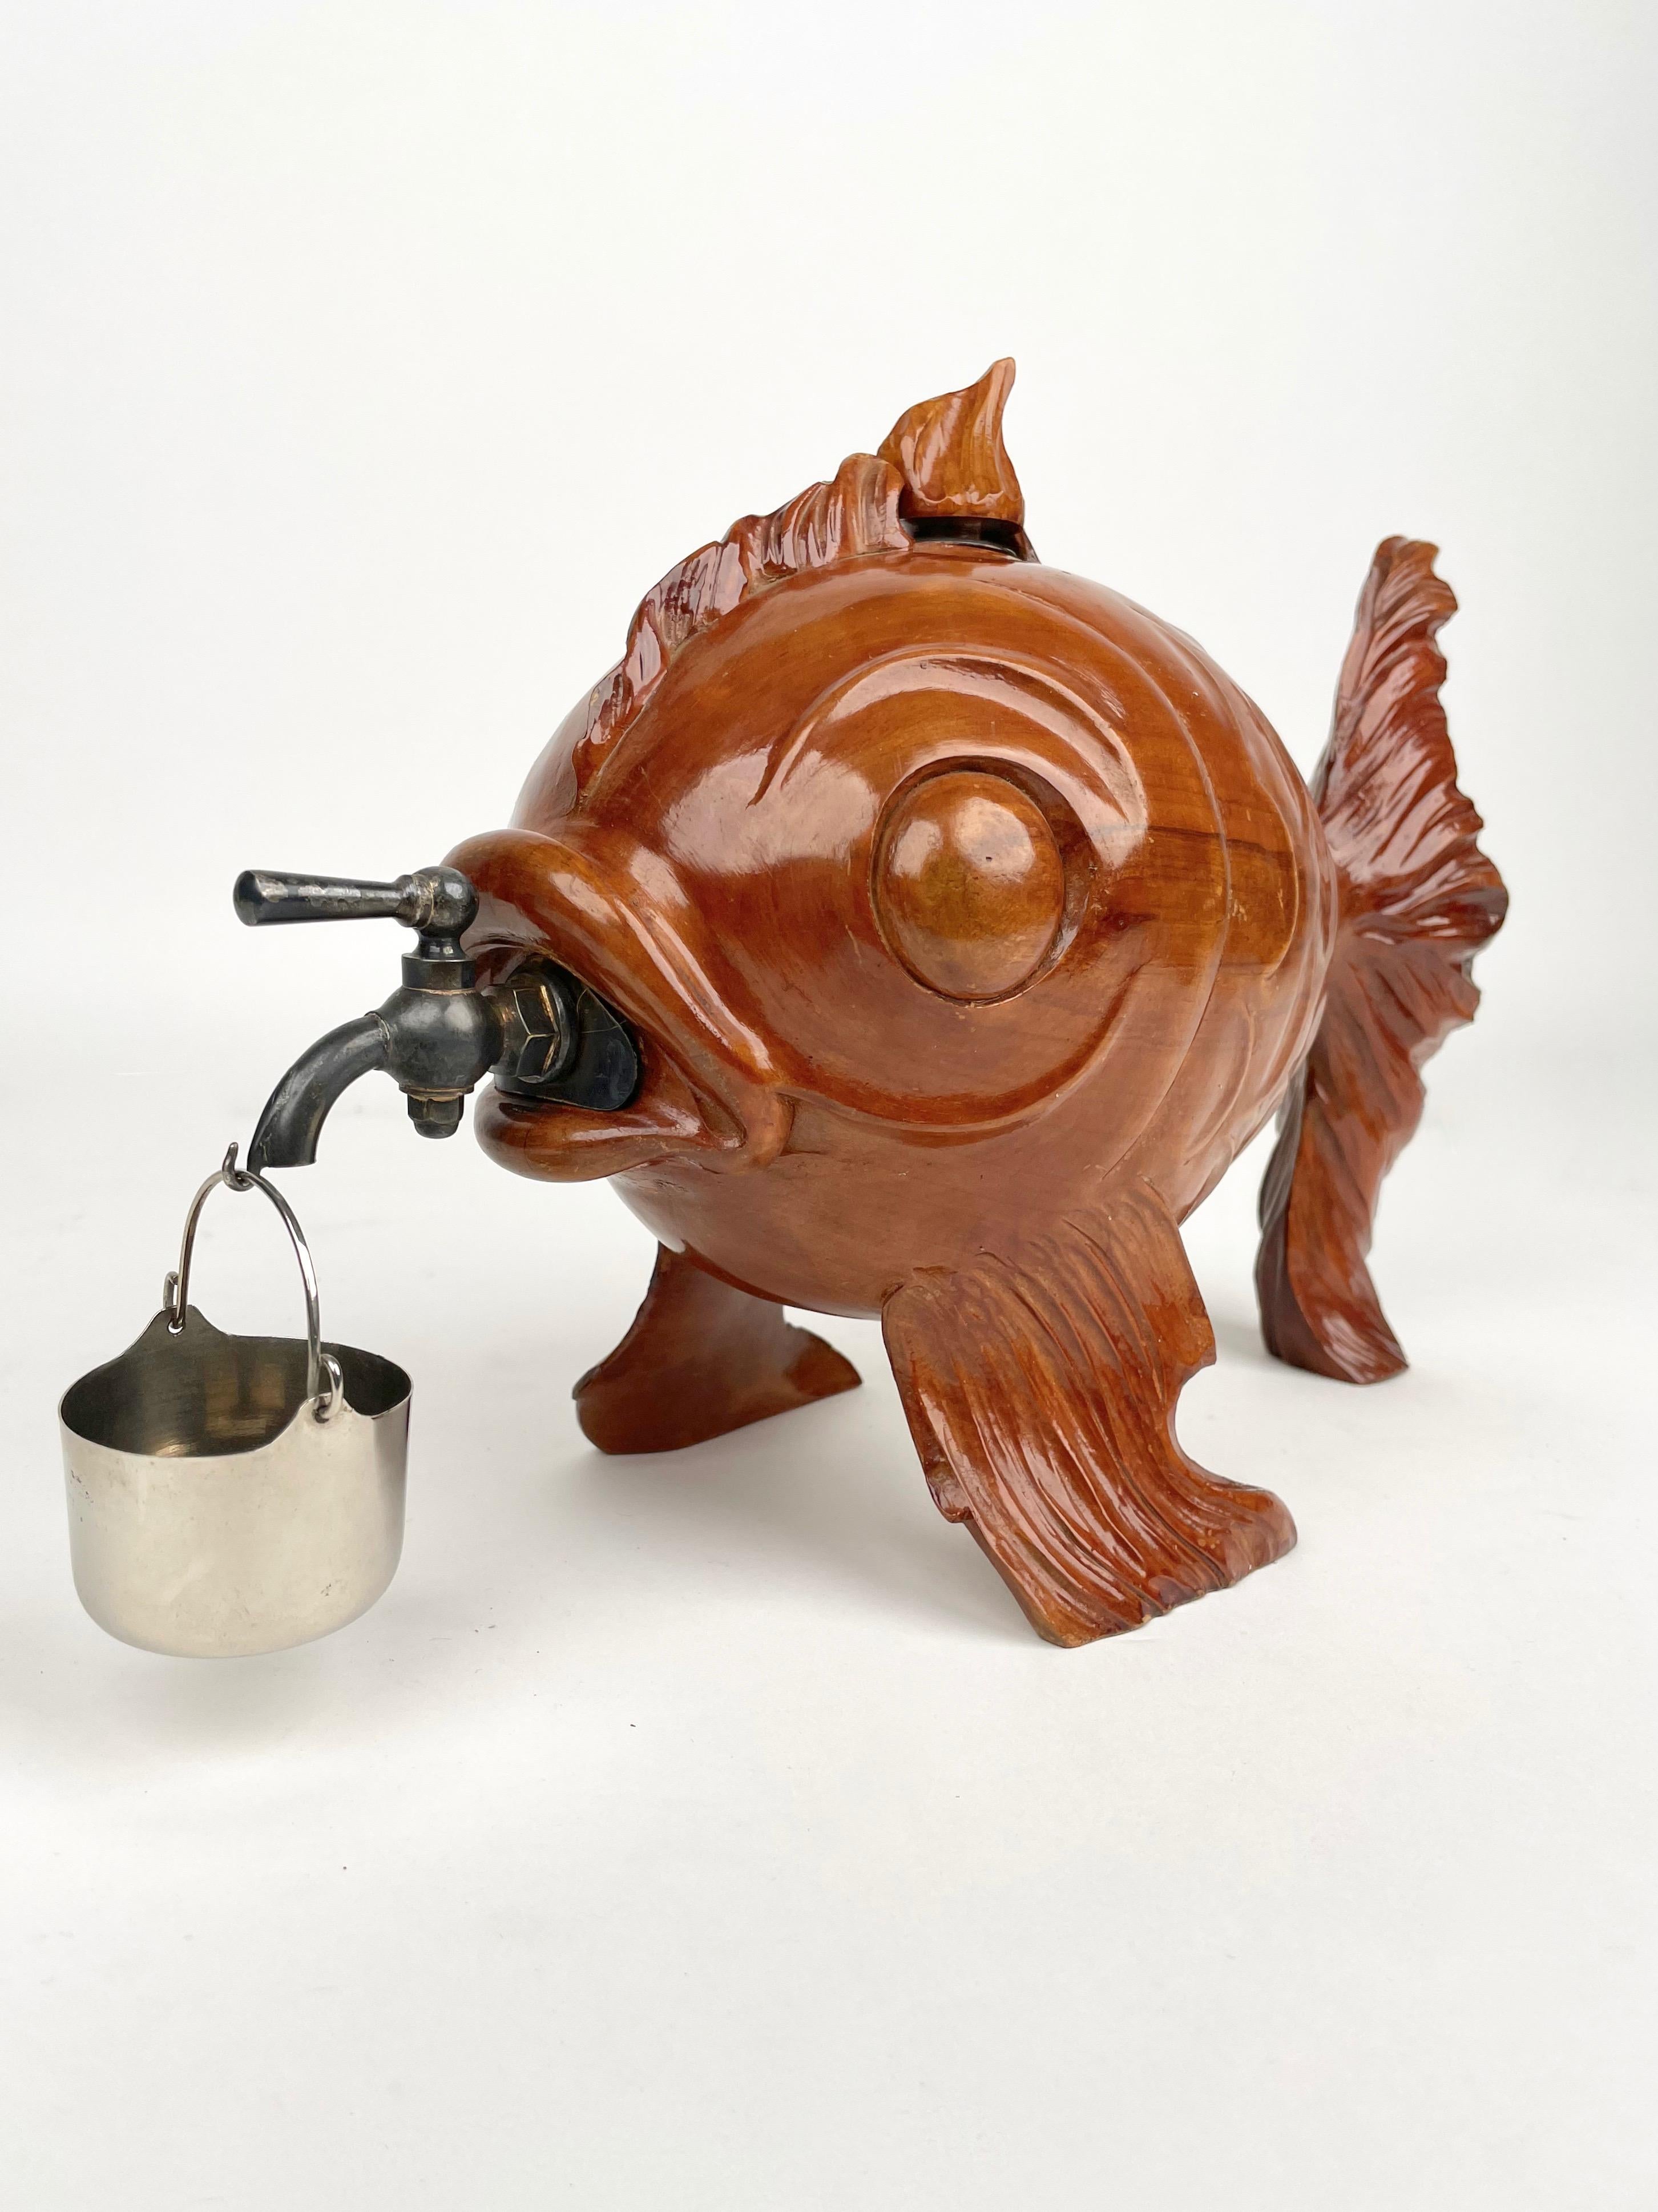 Mid-Century Modern Fish Bottle Dispenser Hand Carved Wood & Metal Aldo Tura for Macabo Italy 1950s